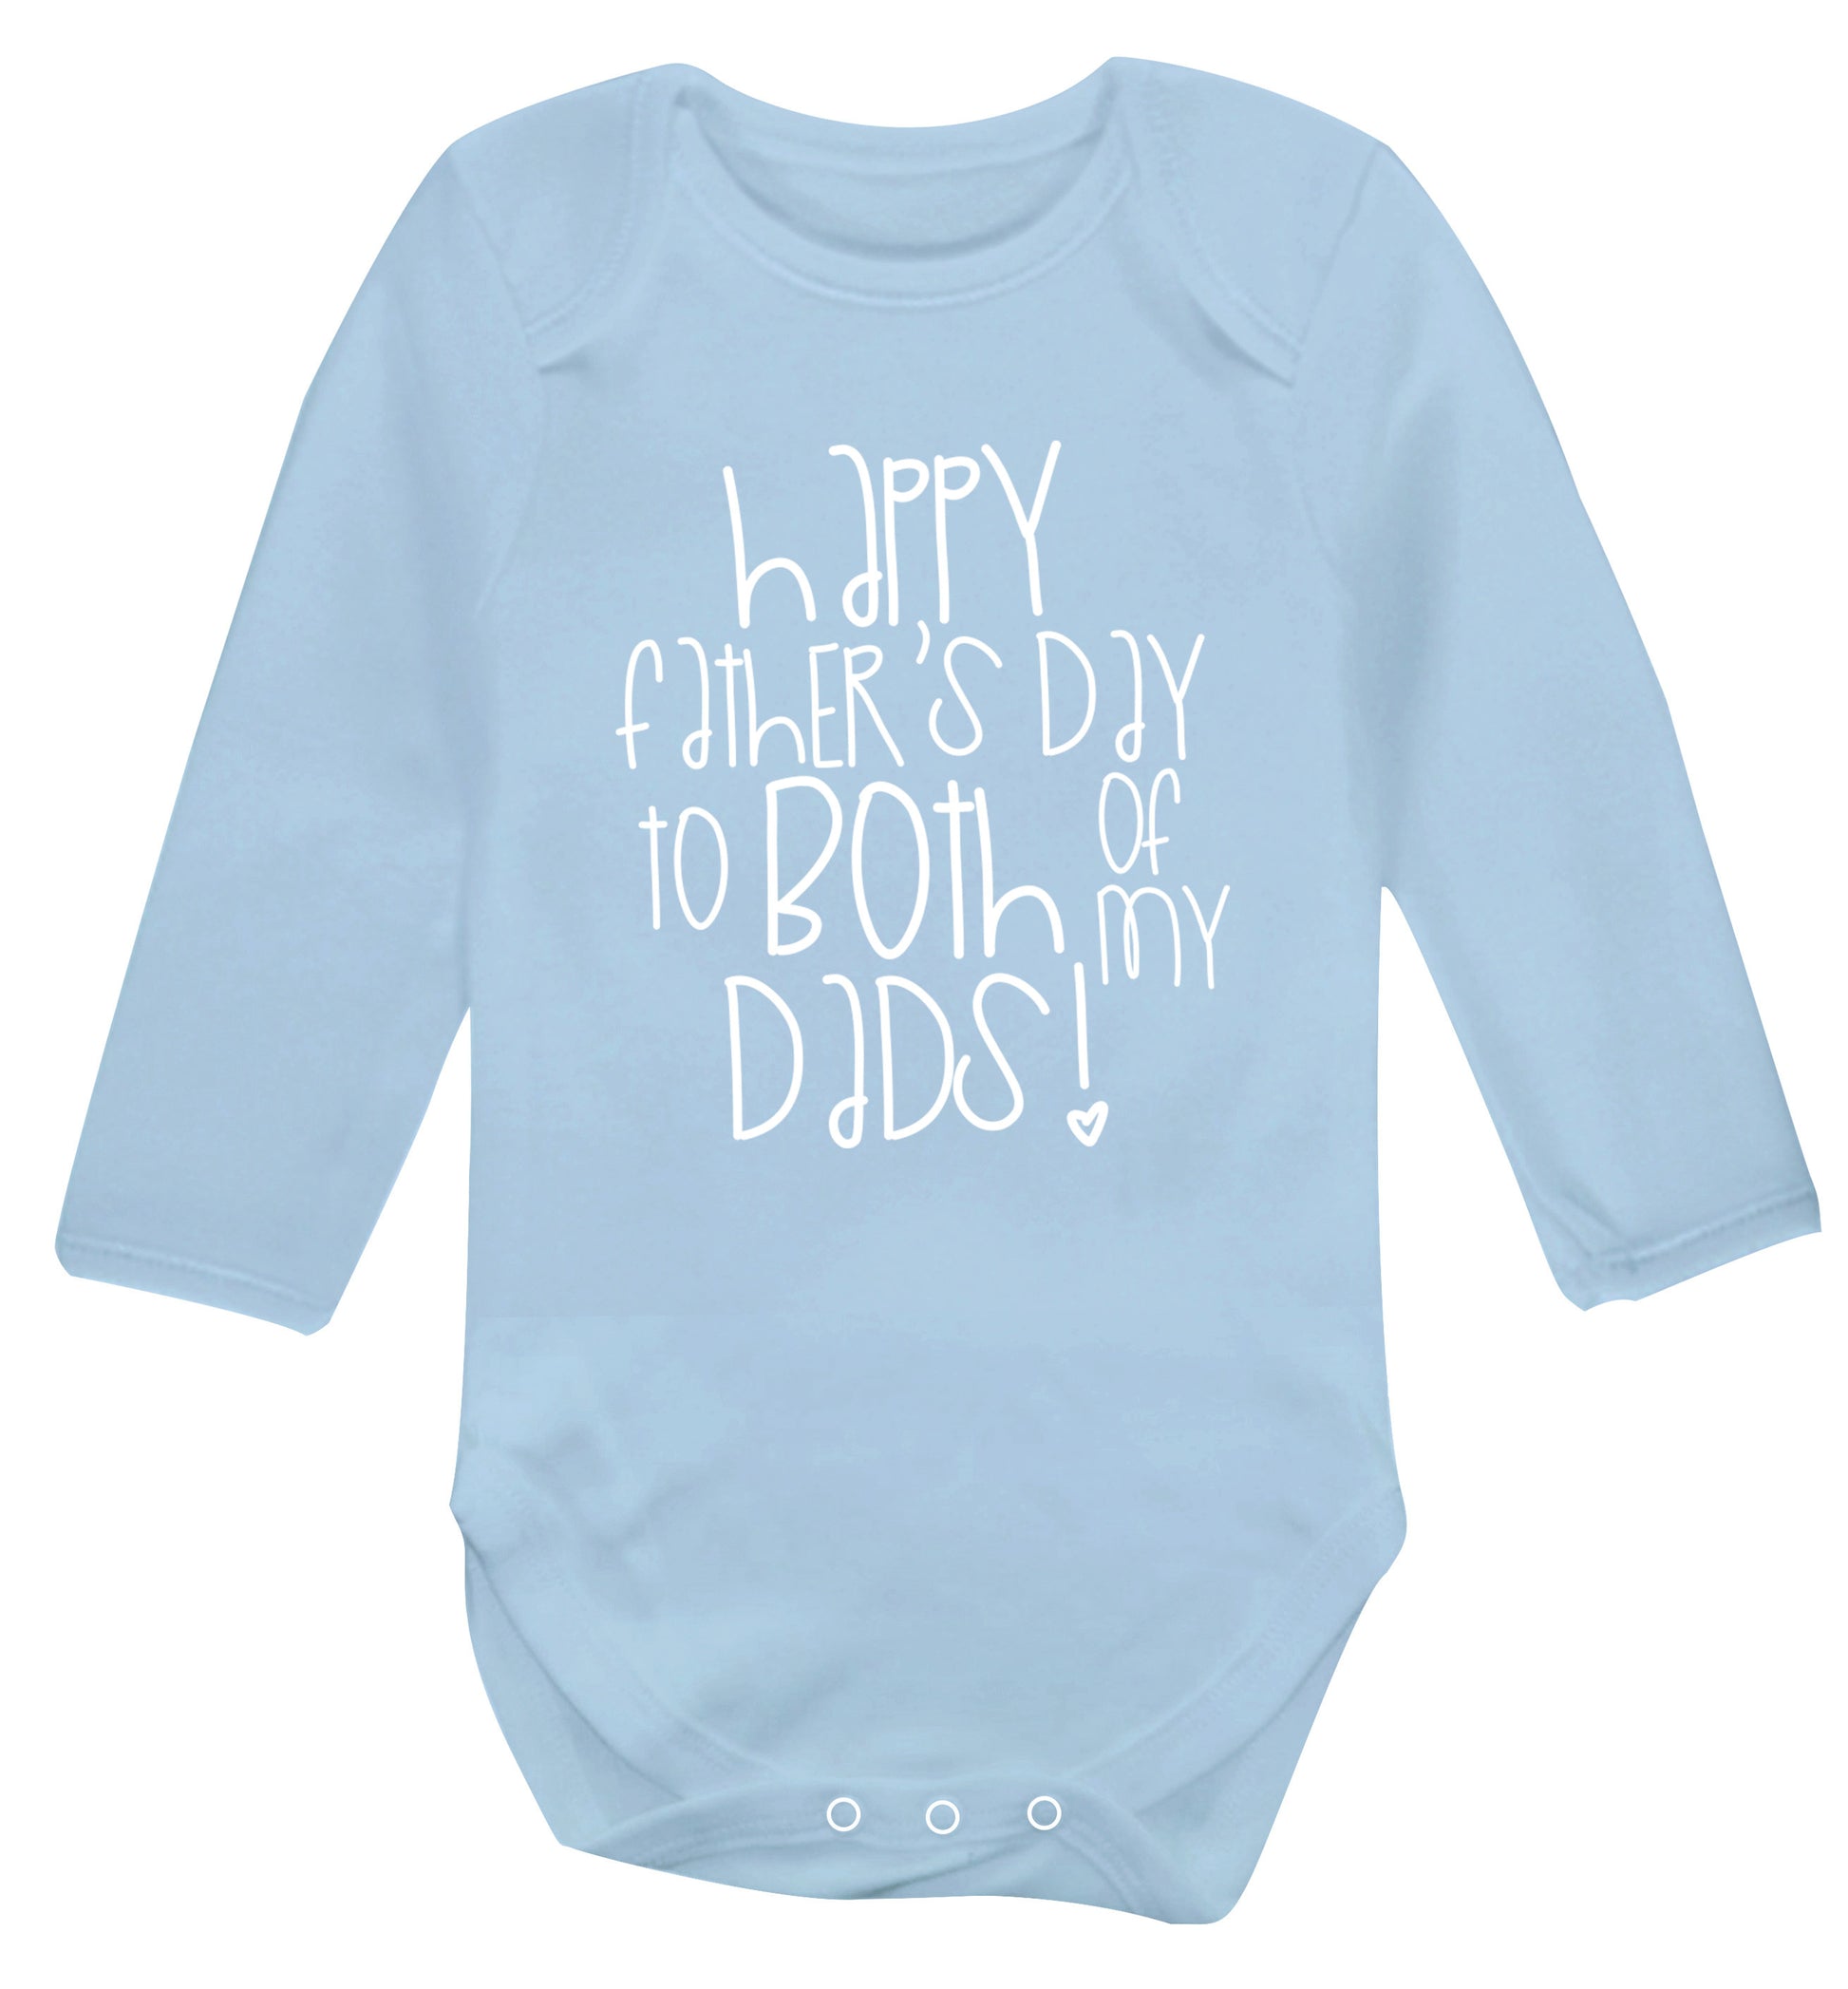 Happy father's day to both of my dads Baby Vest long sleeved pale blue 6-12 months